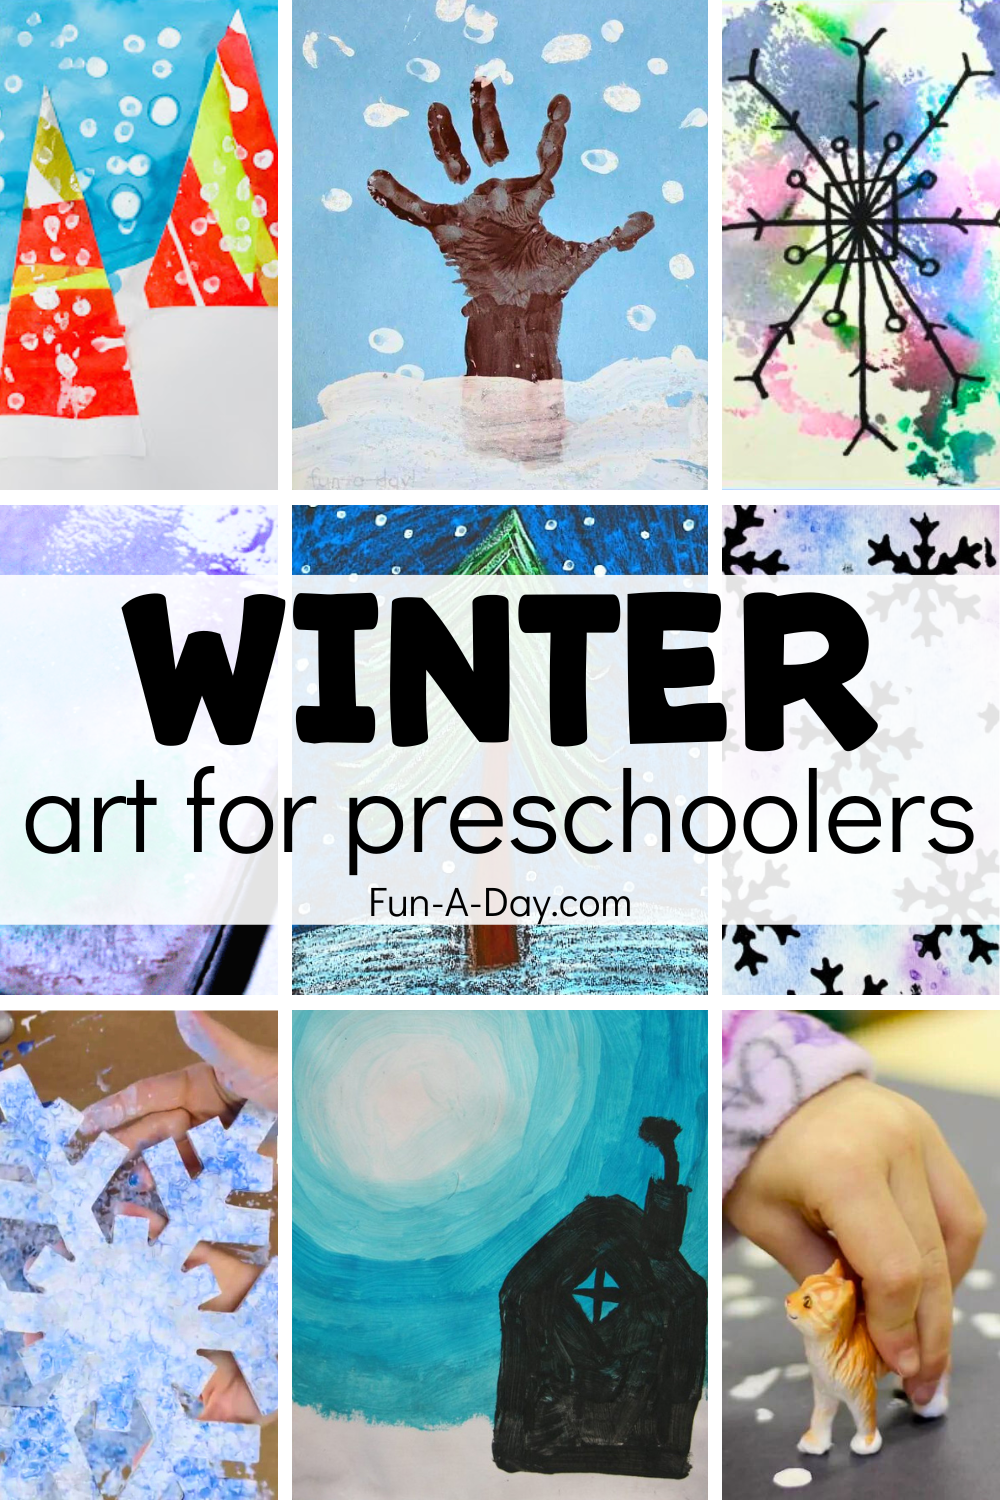 10 winter art project ideas for kids with text that reads winter art for preschoolers.